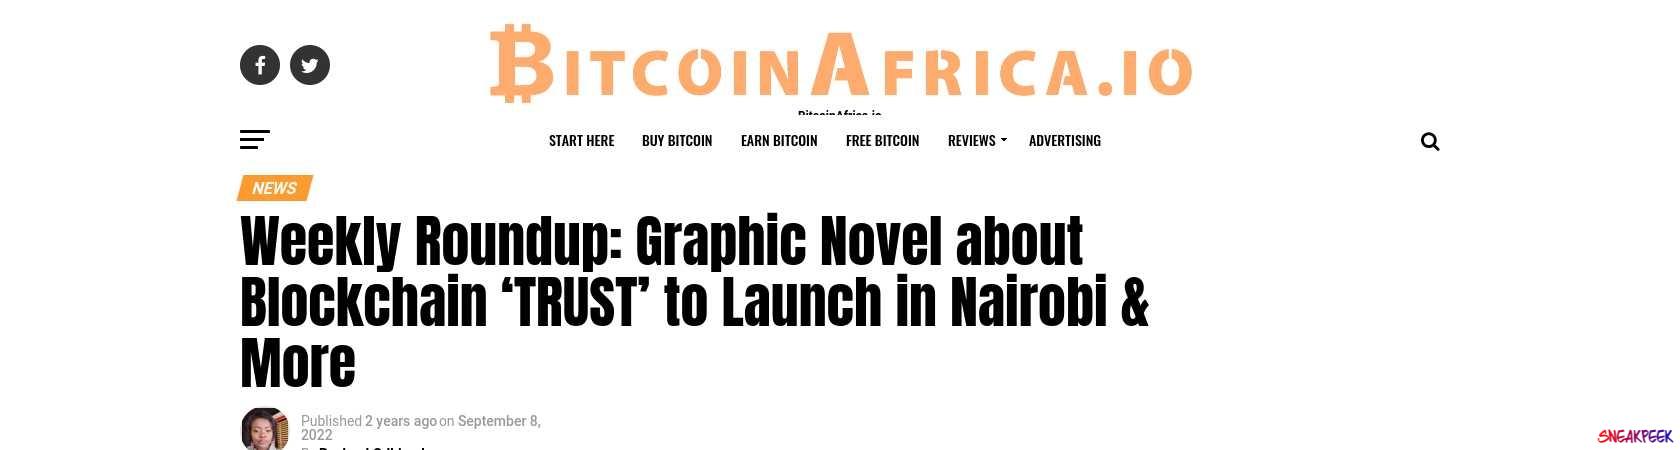 Read the full Article:  ⭲ Weekly Roundup: Graphic Novel about Blockchain ‘TRUST’ to Launch in Nairobi & More